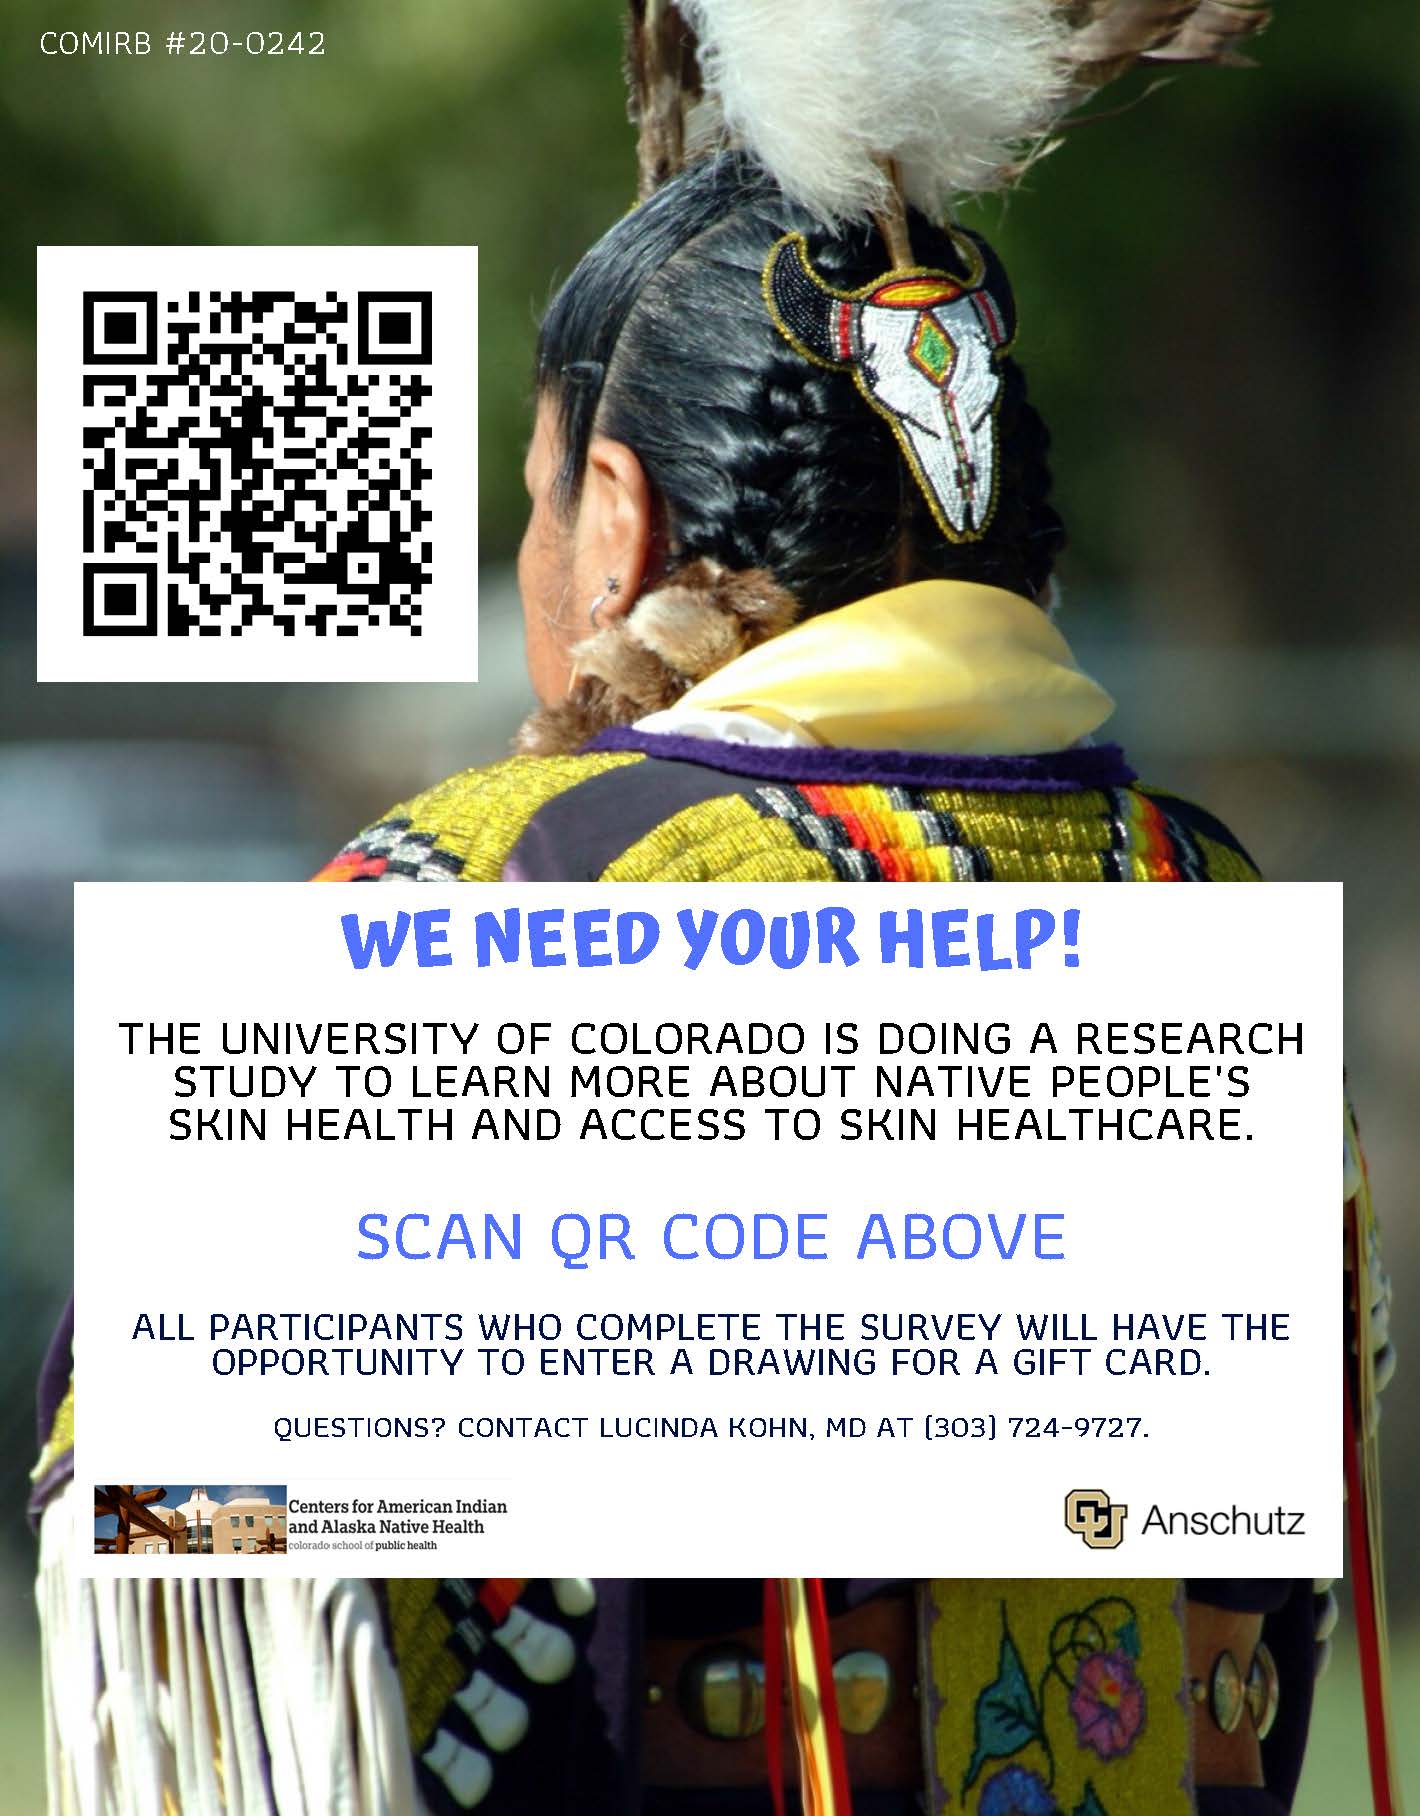 Screenshot of flyer advertising the University of Colorado research study on Native skin health